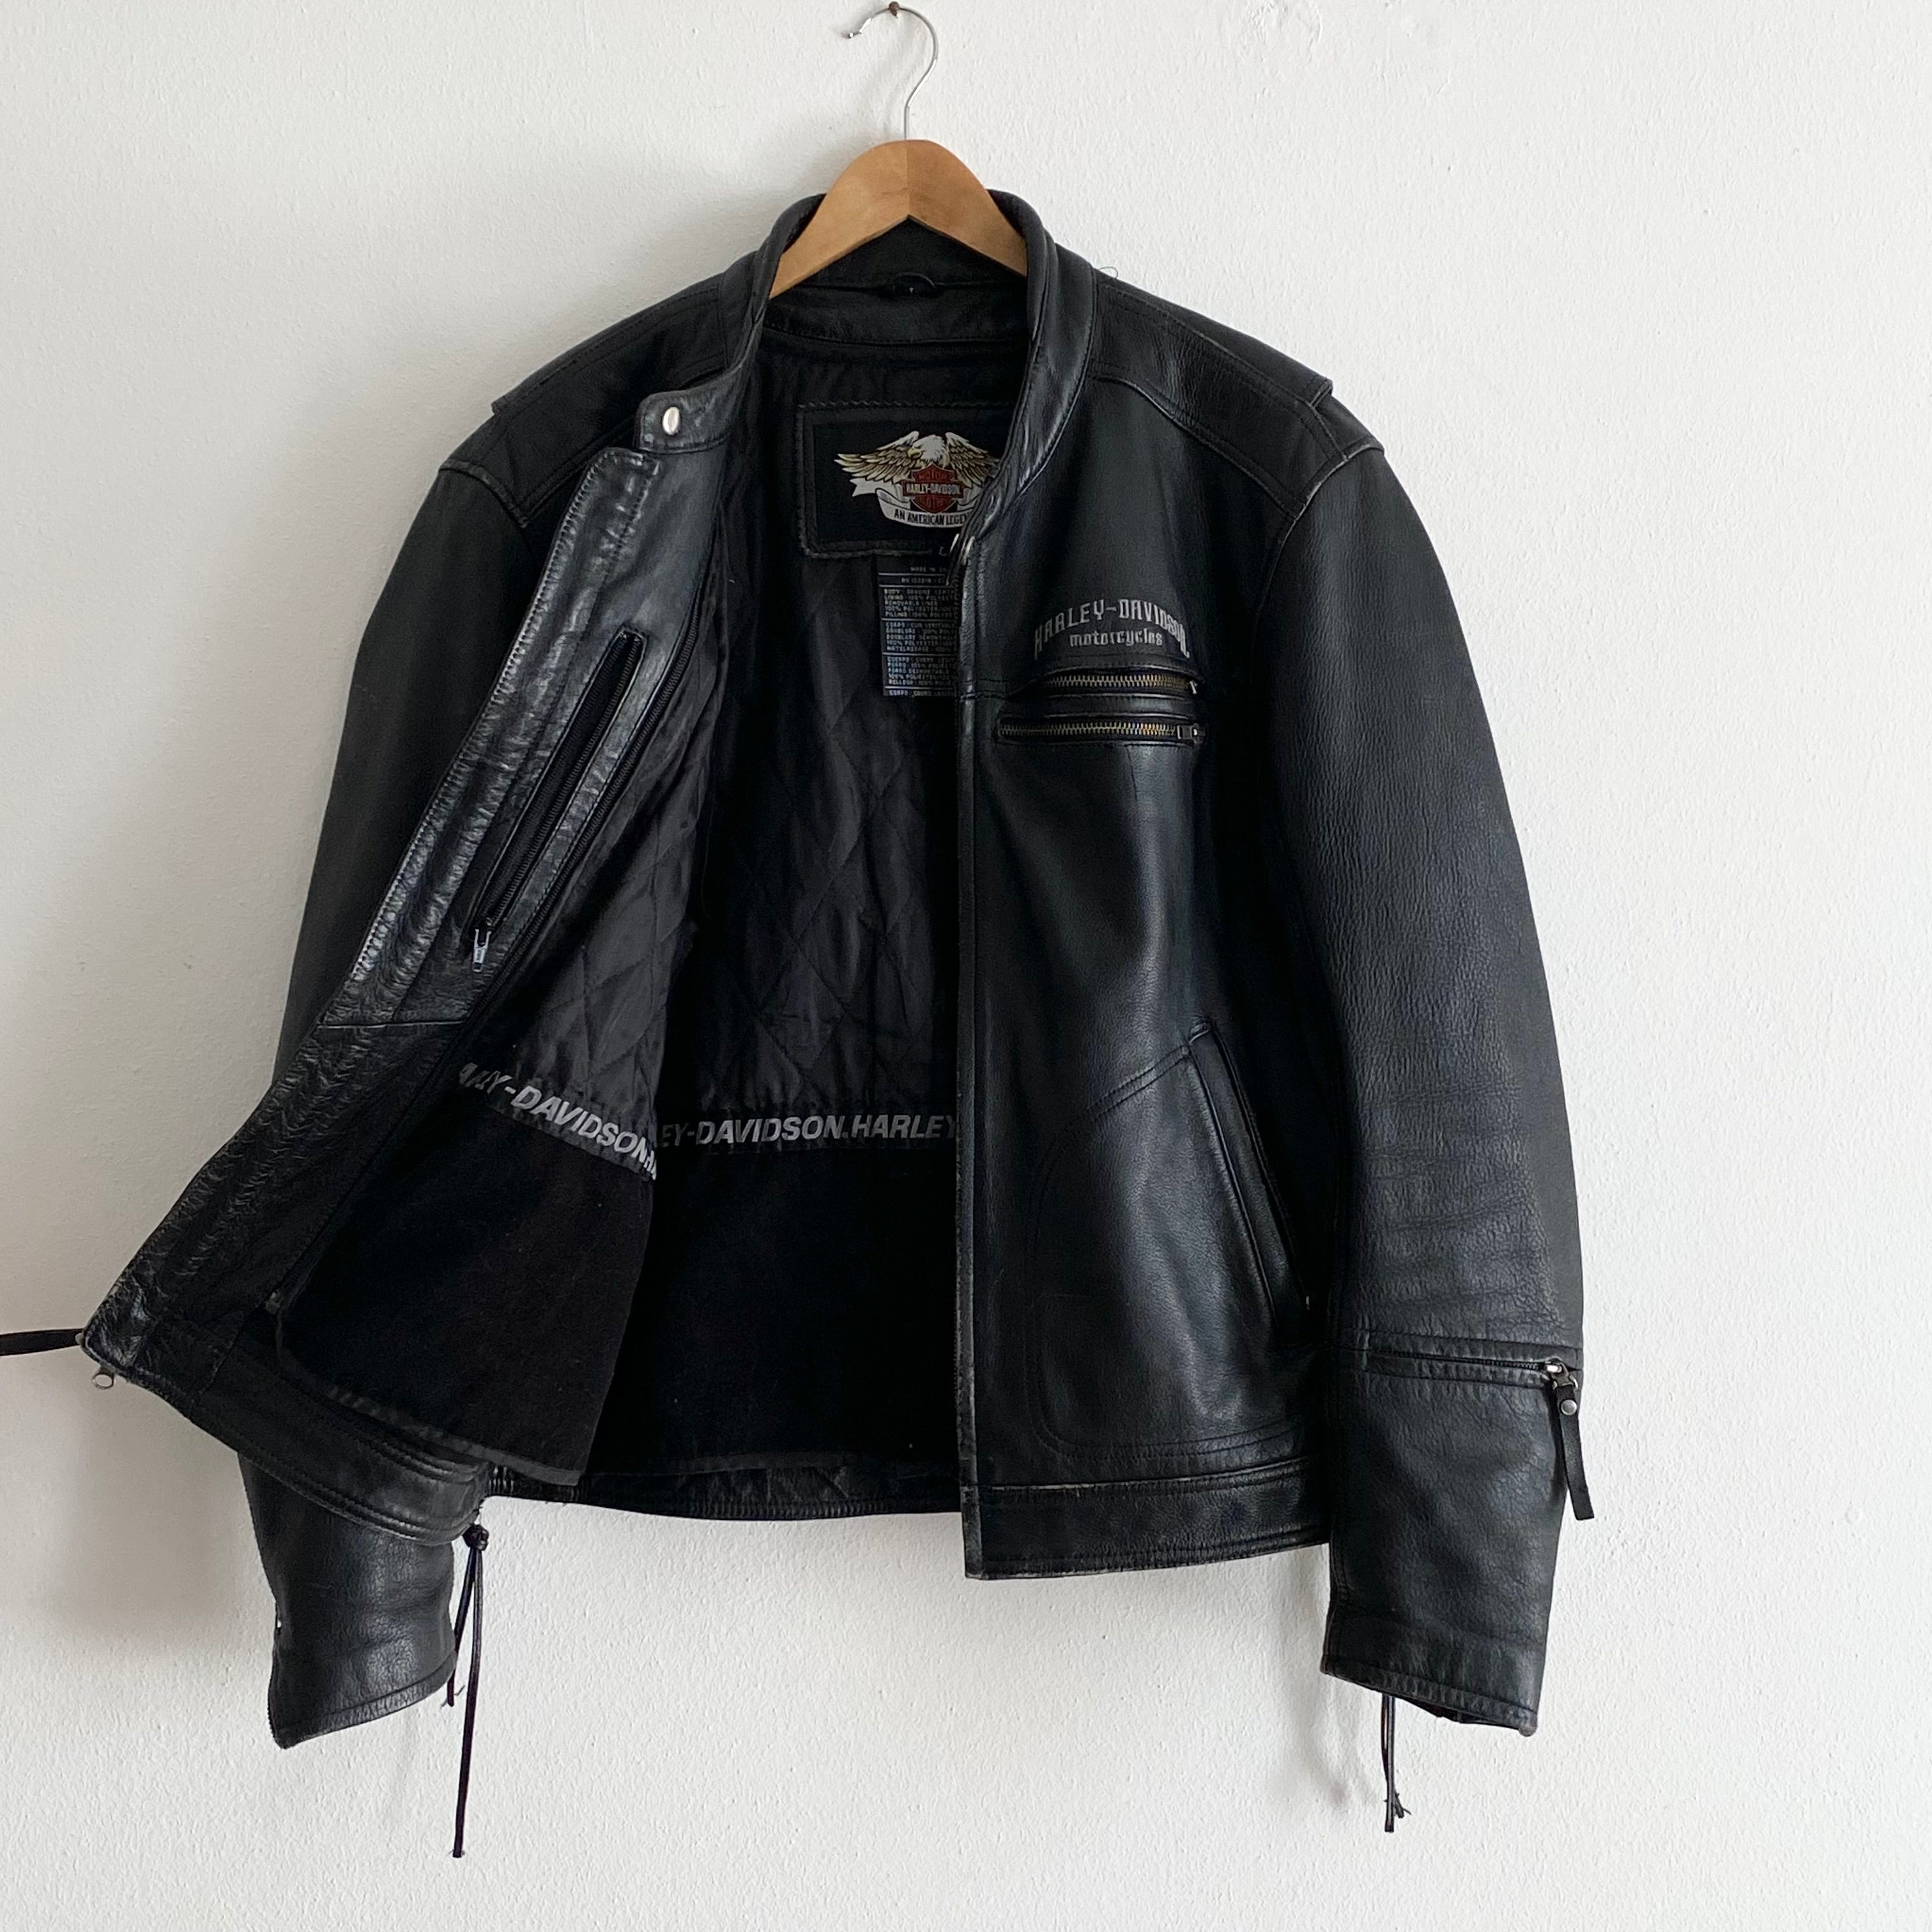 Lined Motorcycle Leather Jacket - L